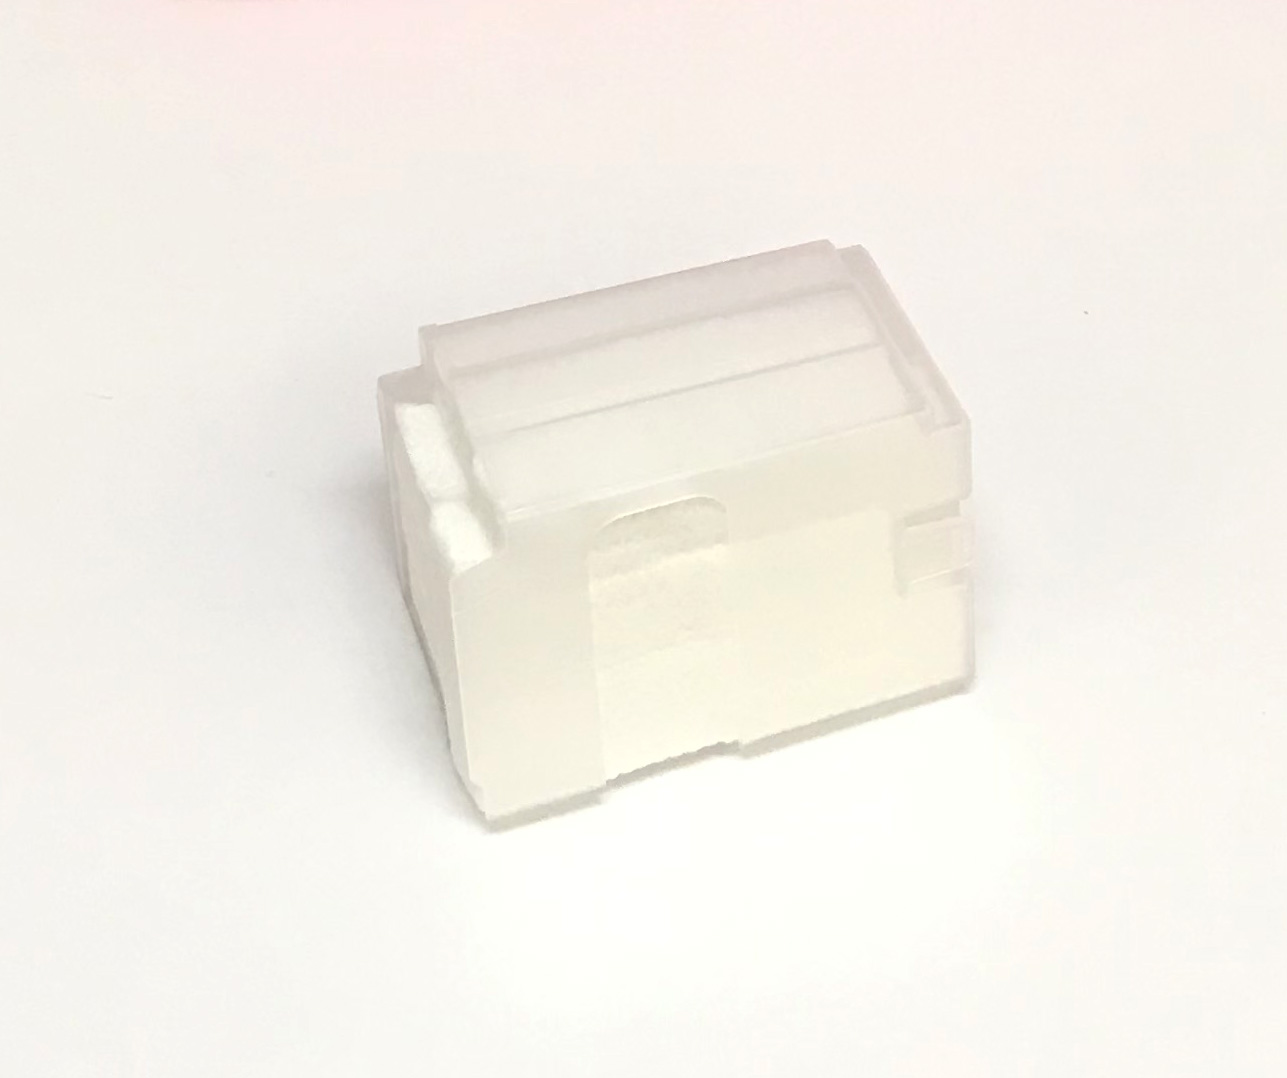 Brother OEM Brother Ink Absorber Box Waste Assembly Originally Shipped With MFC-J890DW, MFCJ985DW, MFC-J985DW